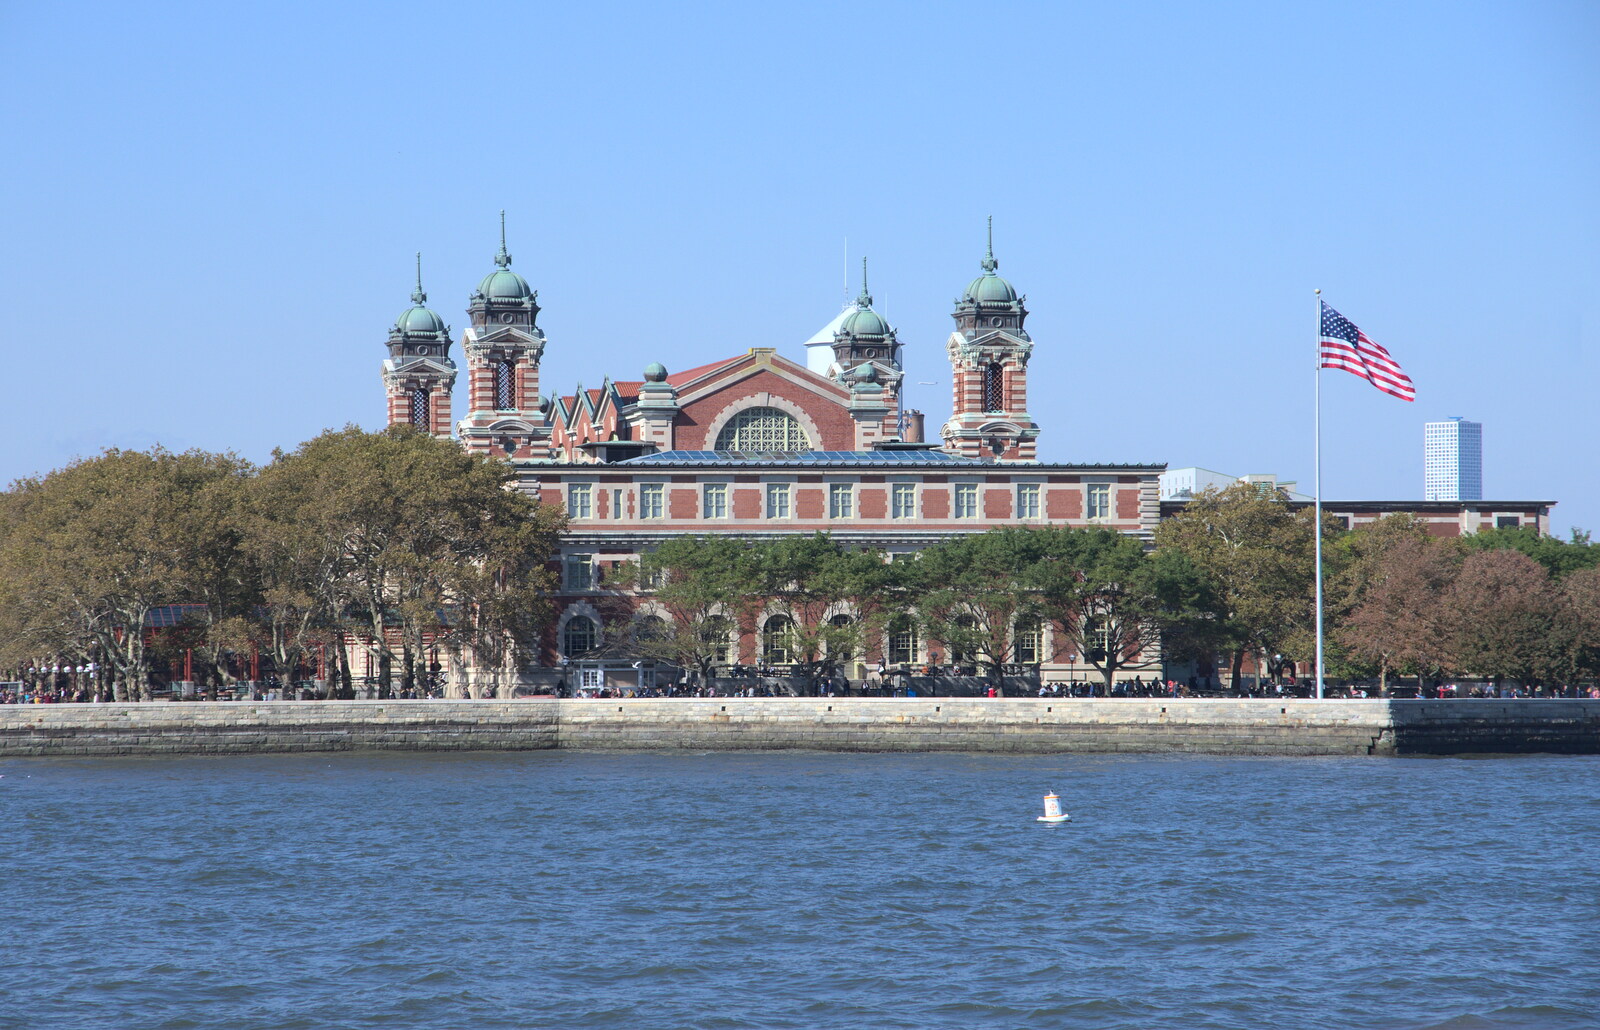 Ellis Island from The Liberty Cruise and One World Trade Center, New York, United States - 23rd October 2018